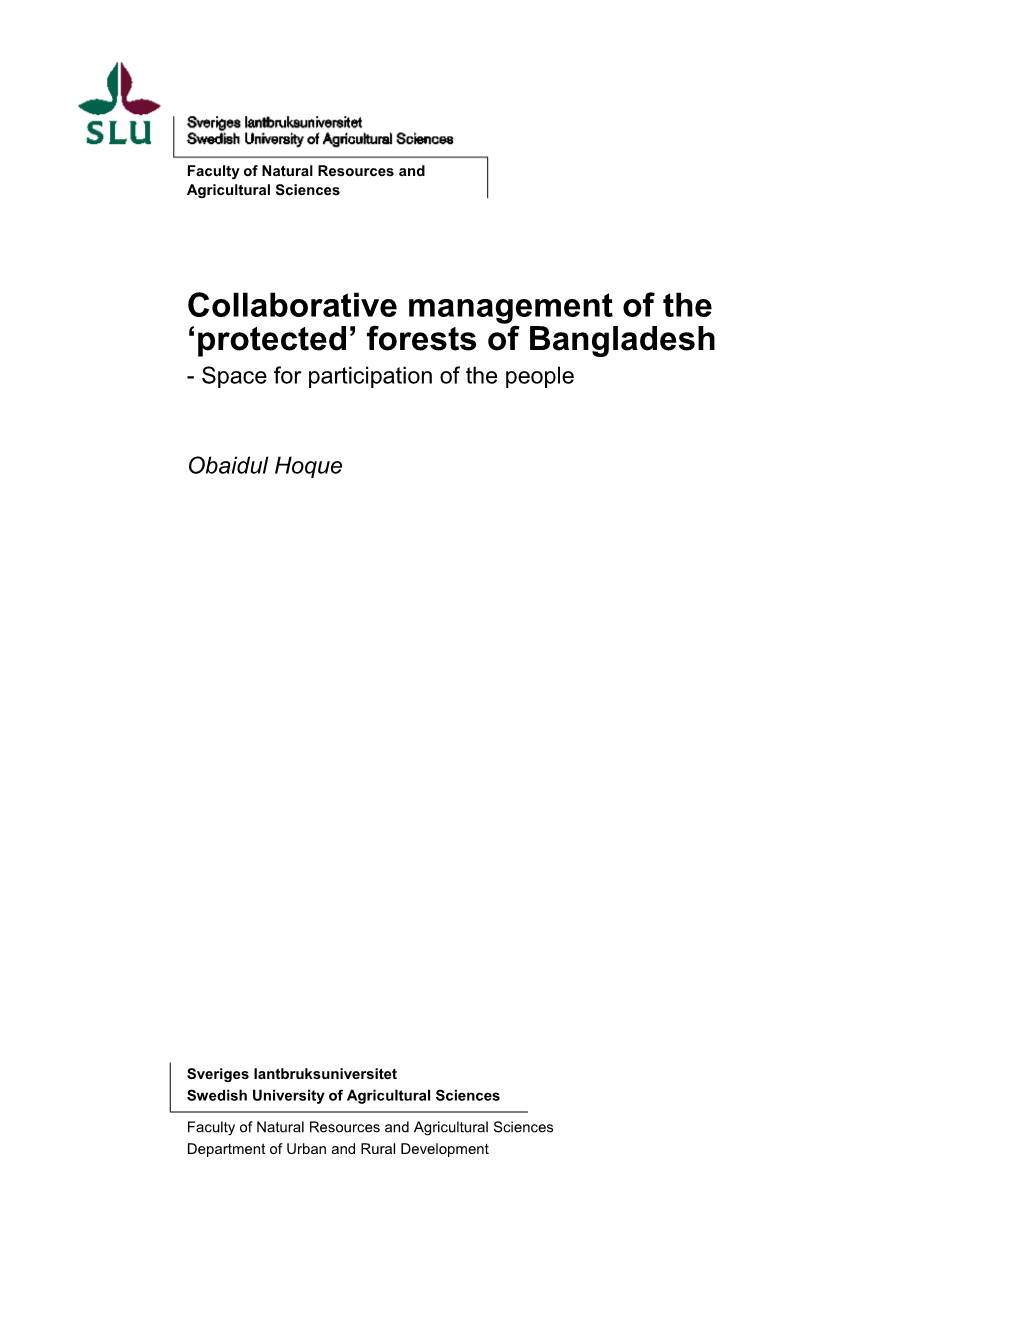 Collaborative Management of the 'Protected' Forests of Bangladesh